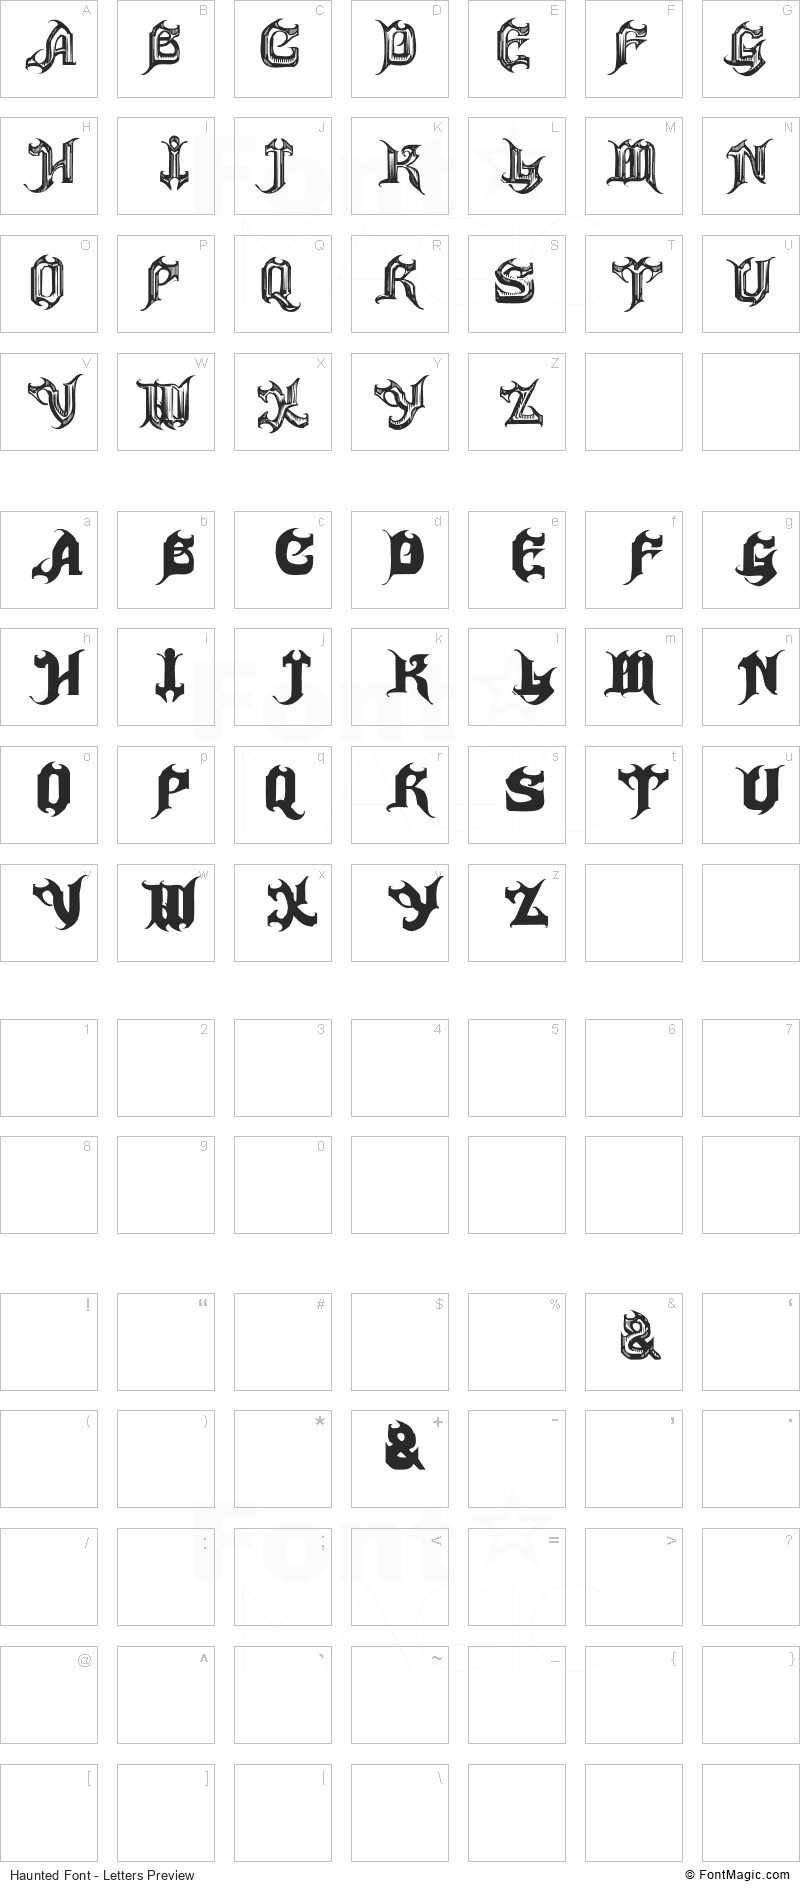 Haunted Font - All Latters Preview Chart